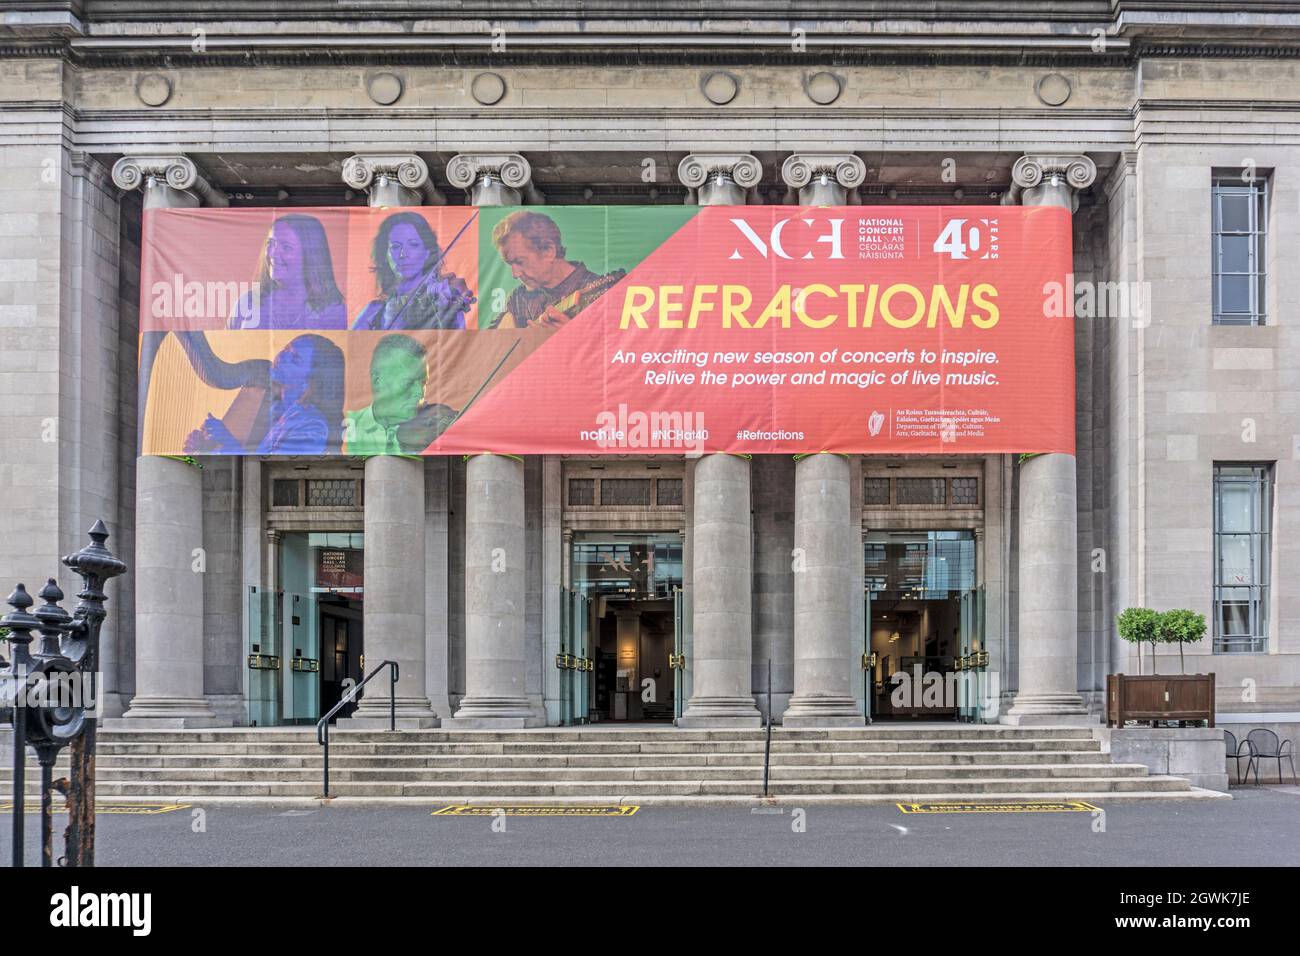 The National Concert Hall in Earlsfort Terrace, Dublin, Ireland announcing their new season of live music, Refractions. Celebrating Chamber Music. Stock Photo